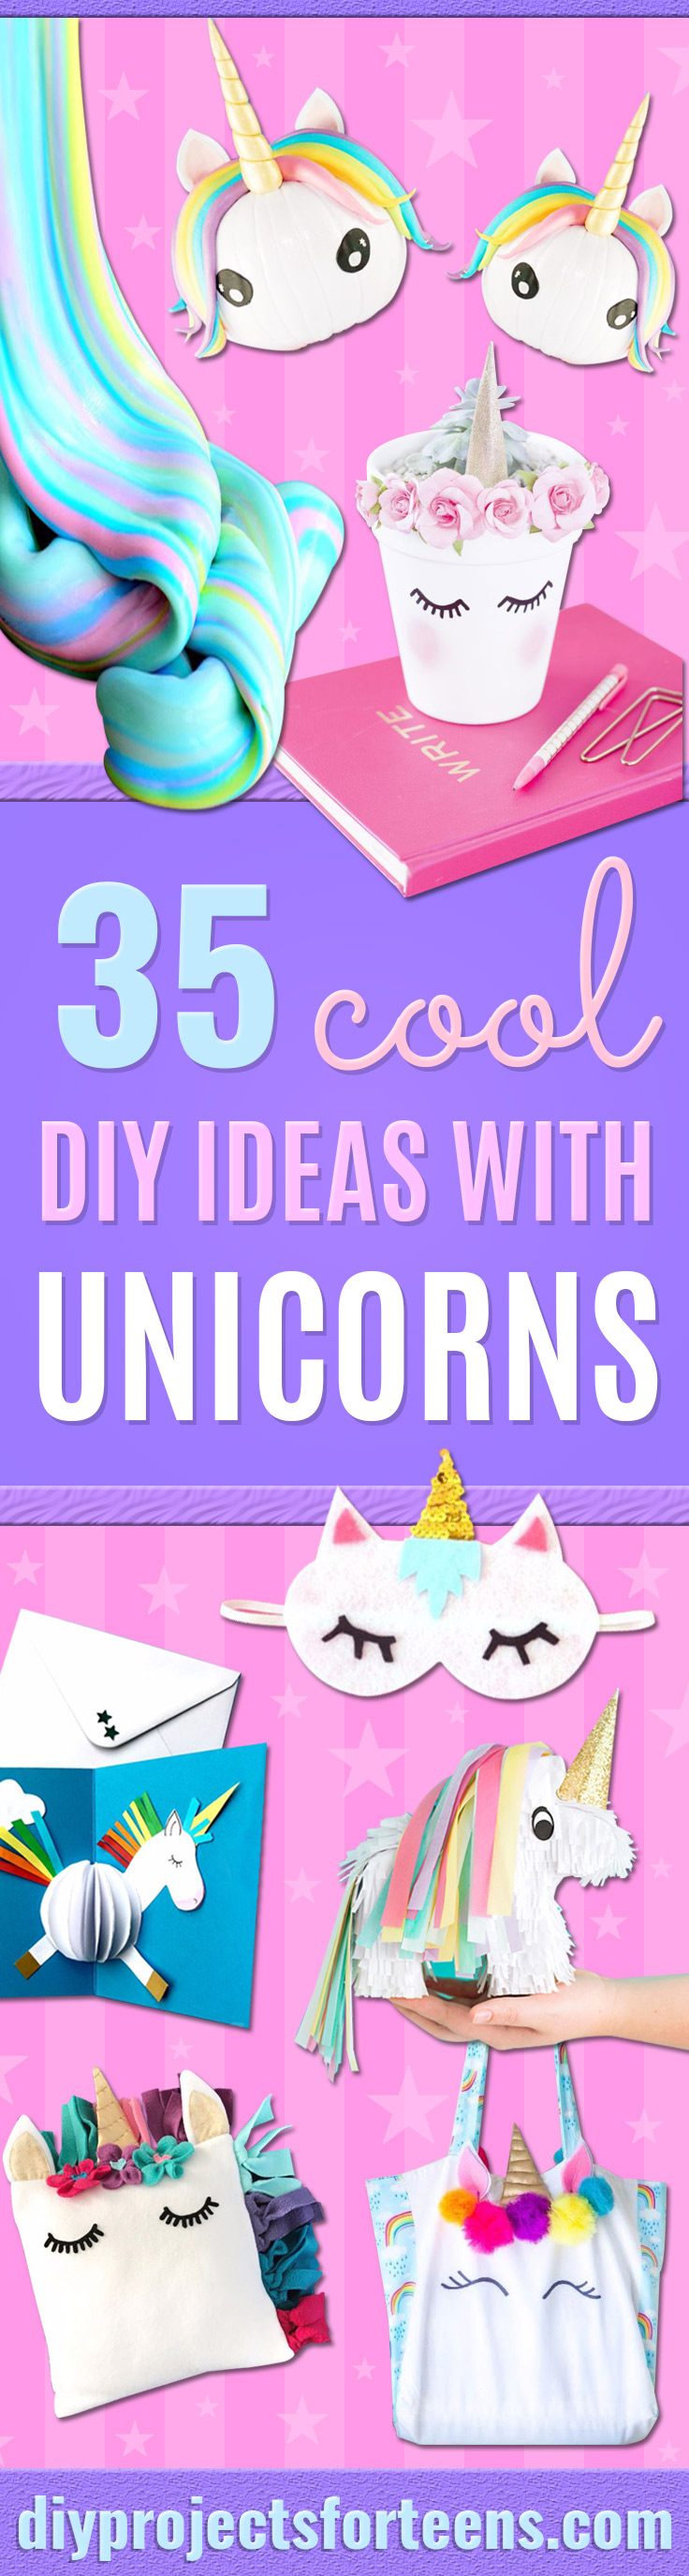 DIY Ideas With Unicorns - Cute and Easy DIY Projects for Unicorn Lovers - Wall and Home Decor Projects, Things To Make and Sell on Etsy - Quick Gifts to Make for Friends and Family - Homemade No Sew Projects and Pillows - Fun Jewelry, Desk Decor Cool Clothes and Accessories http://diyprojectsforteens.com/diy-ideas-unicorns